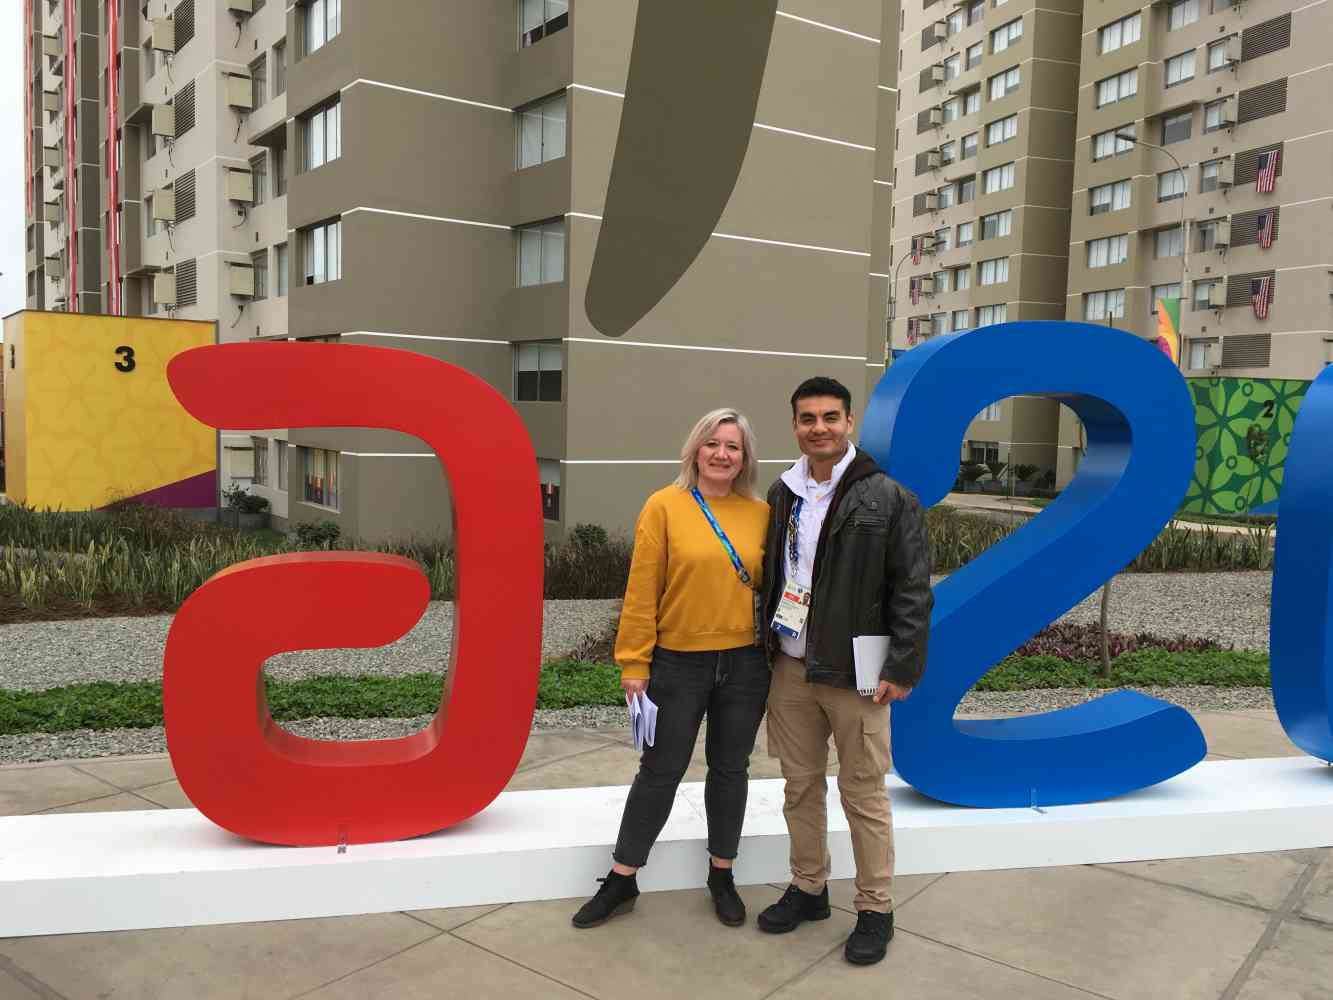 Pan-American Games, Lima, Peru, July-August, 2019 - The A-team: with my local colleague, Jorge